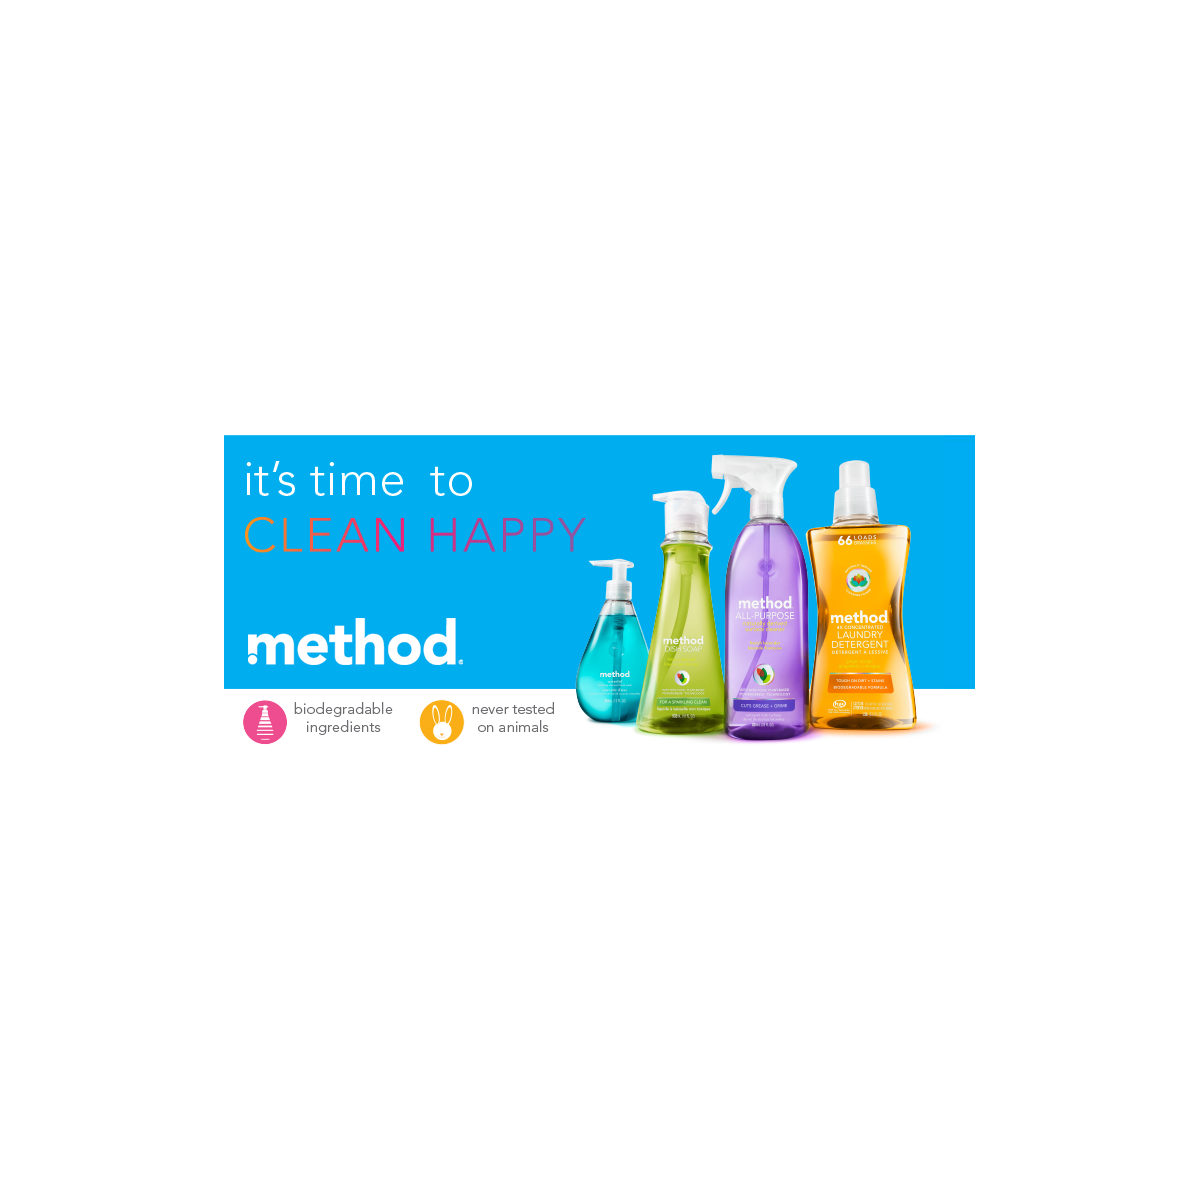 Where to Buy Method Products